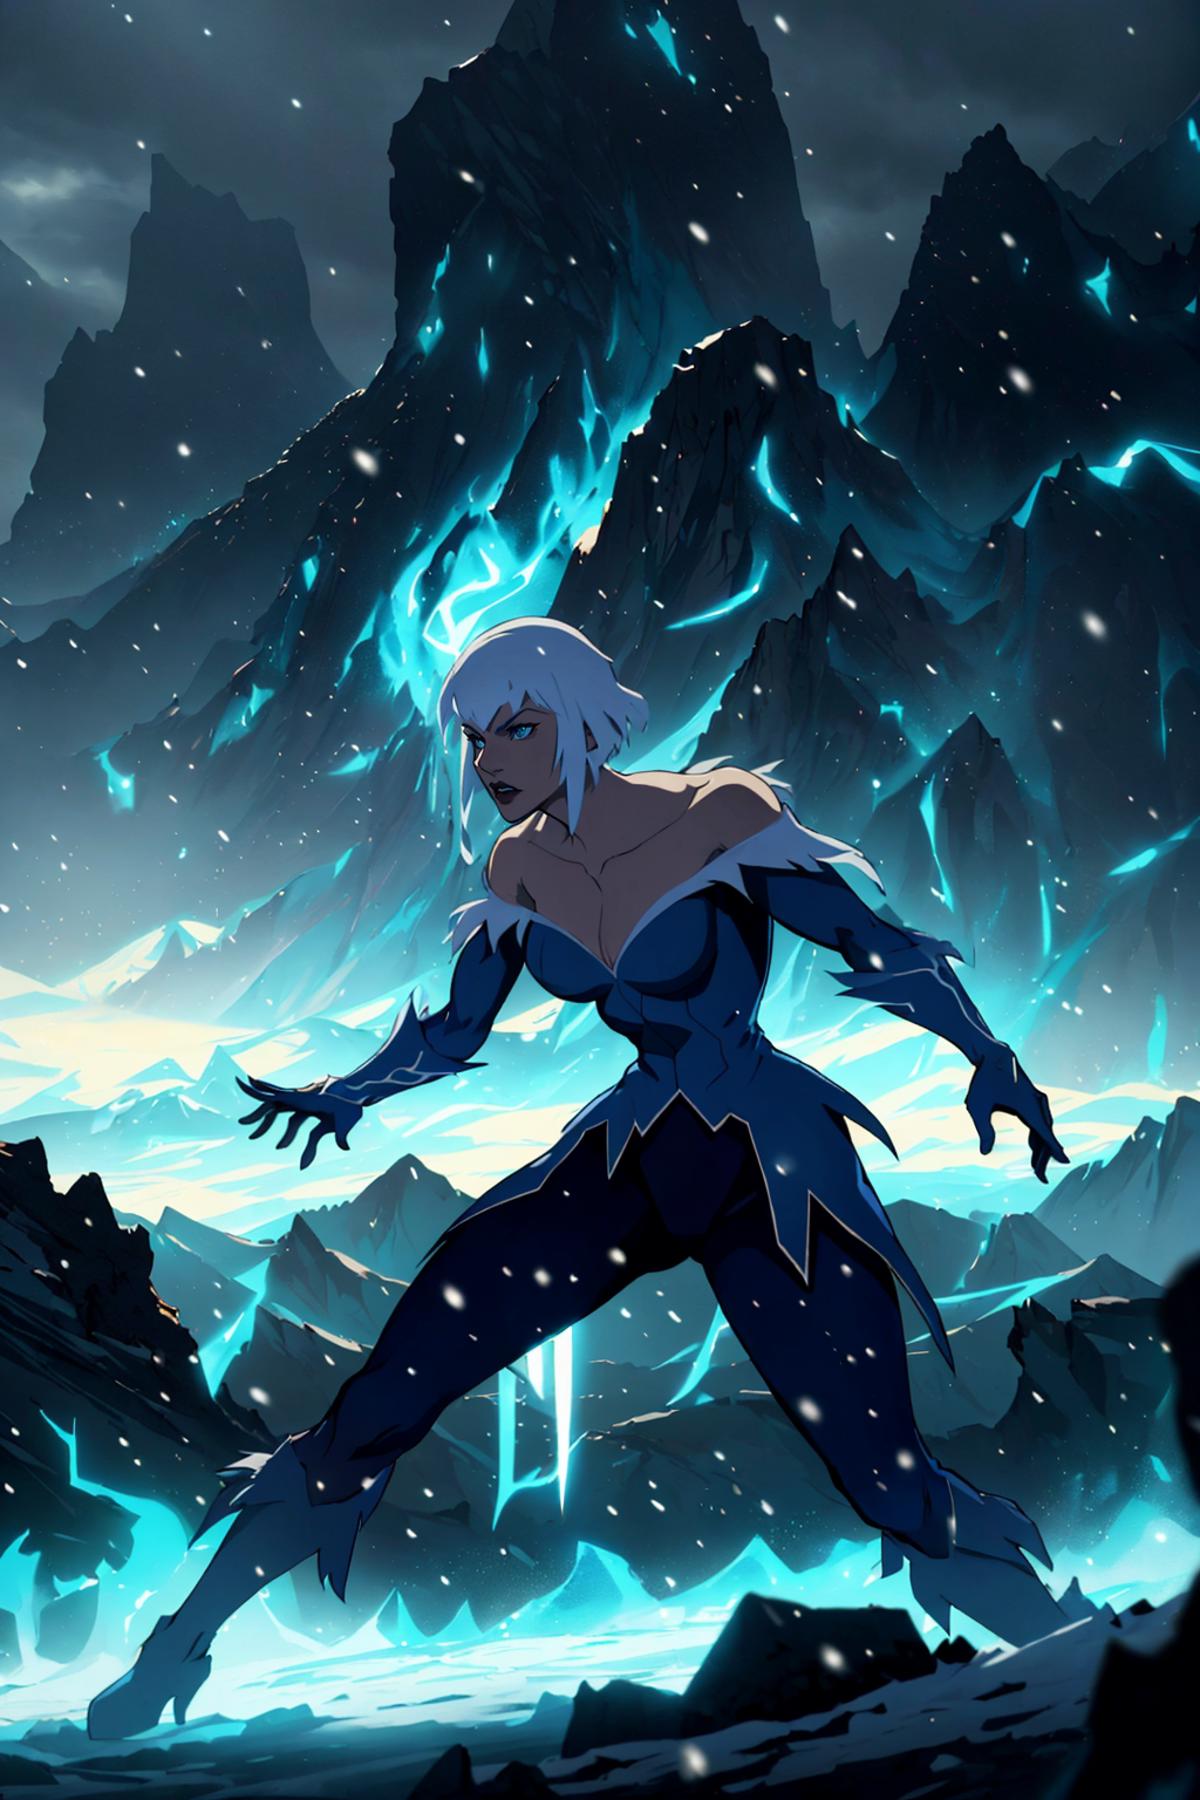 Killer Frost (Suicide Squad) (DC Comics) image by Tokugawa